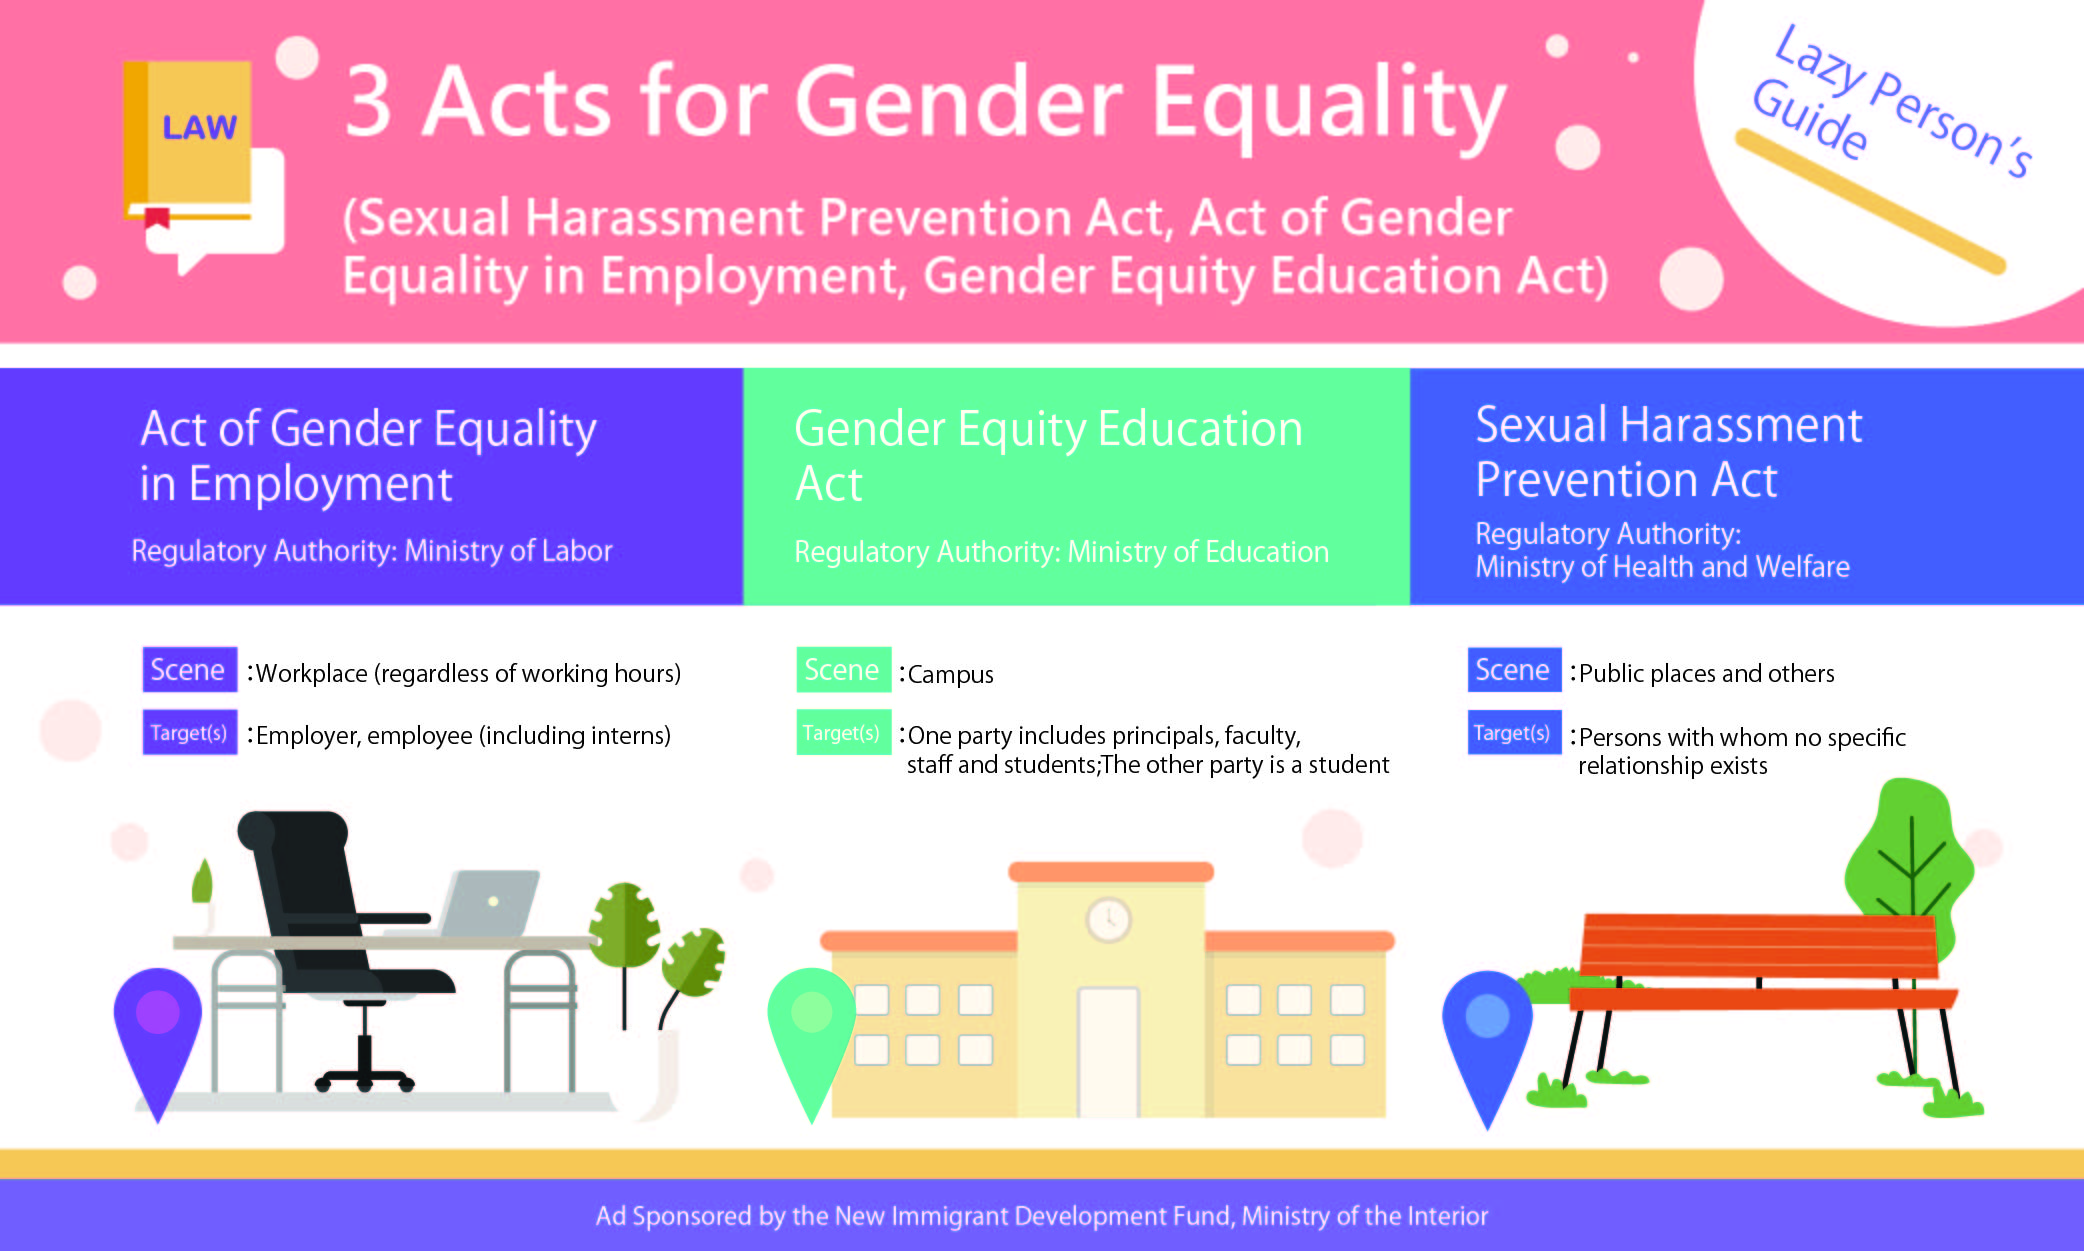 ［Lazy Person’s Guide］3 Acts for Gender Equality (Sexual Harassment Prevention Act, Act of Gender Equality in Employment, Gender Equity Education Act)